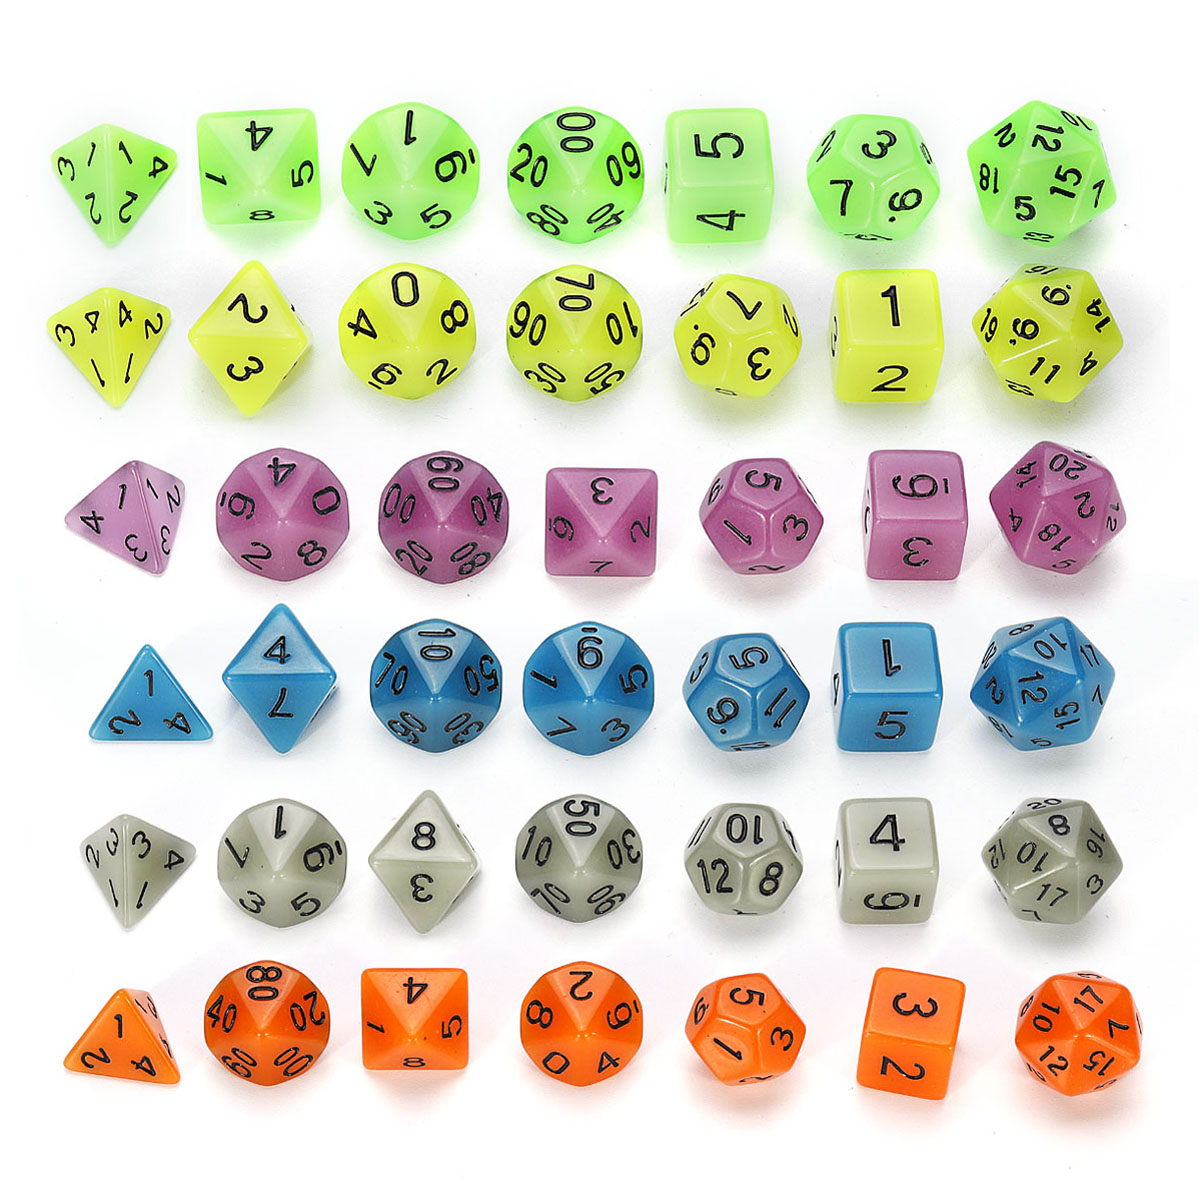 7-Pcs-Luminous-Polyhedral-Dices-Multi-sided-Dice-Set-Polyhedral-Dices-With-Dice-Cup-RPG-Gadget-1422236-3